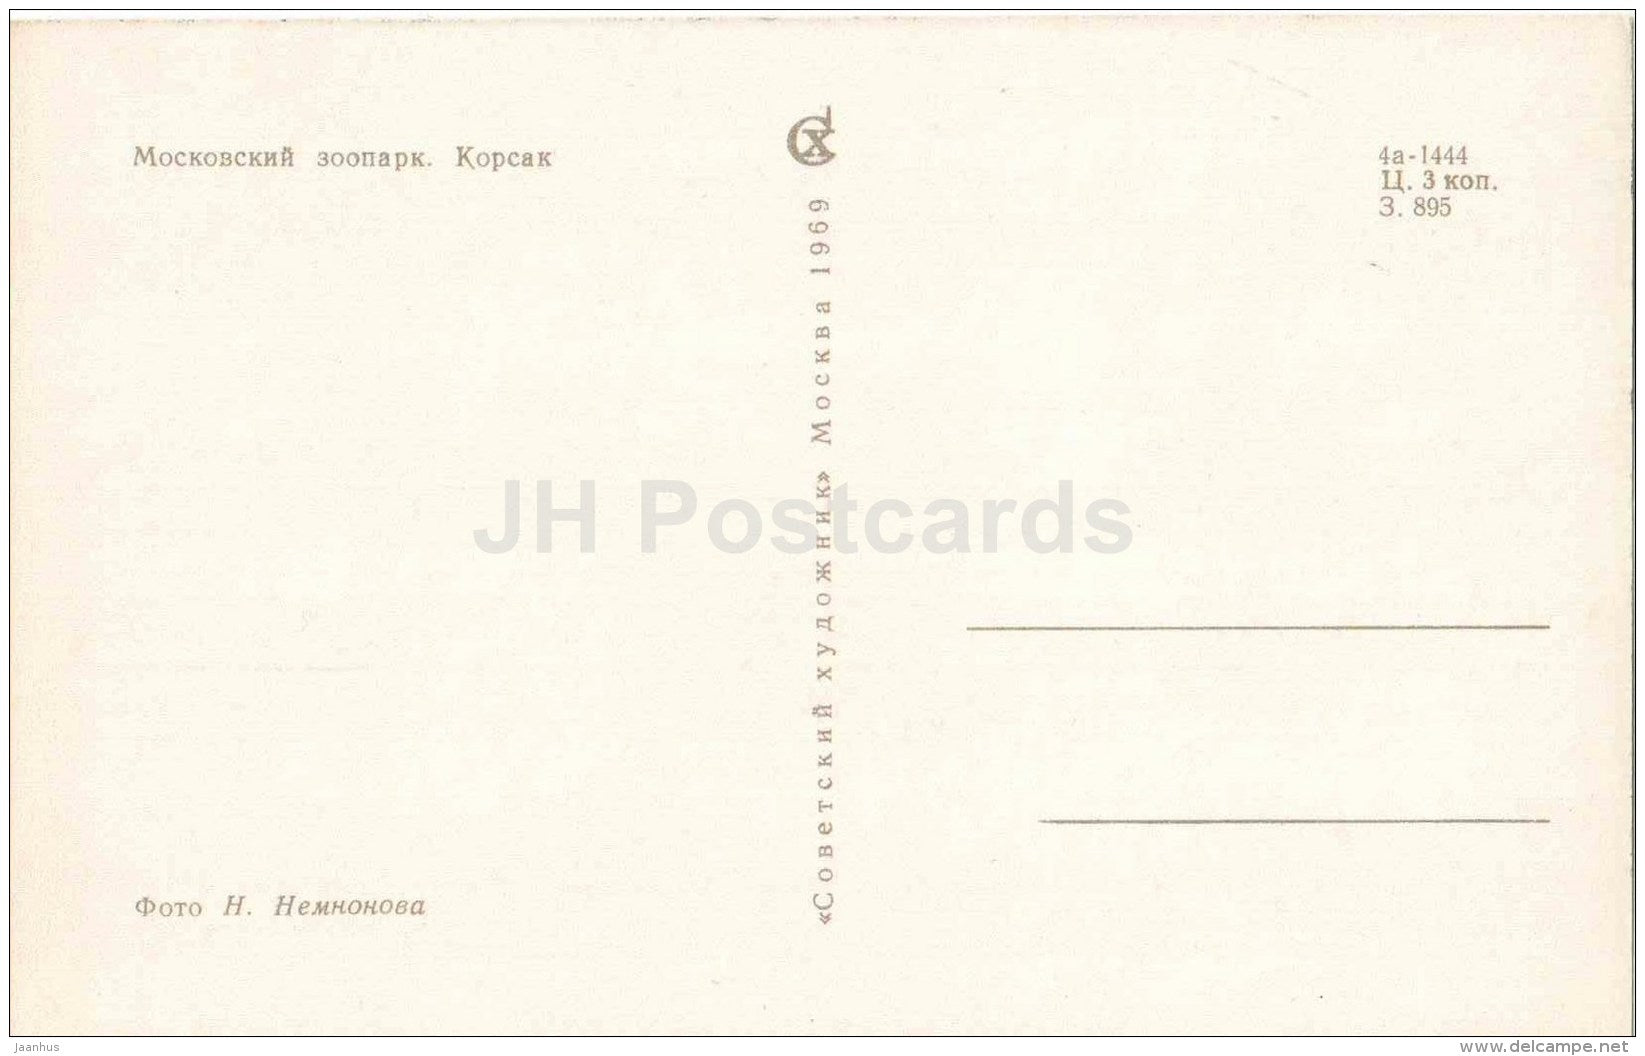 Corsac fox - Vulpes corsac - Moscow Zoo - 1969 - Russia USSR - unused - JH Postcards